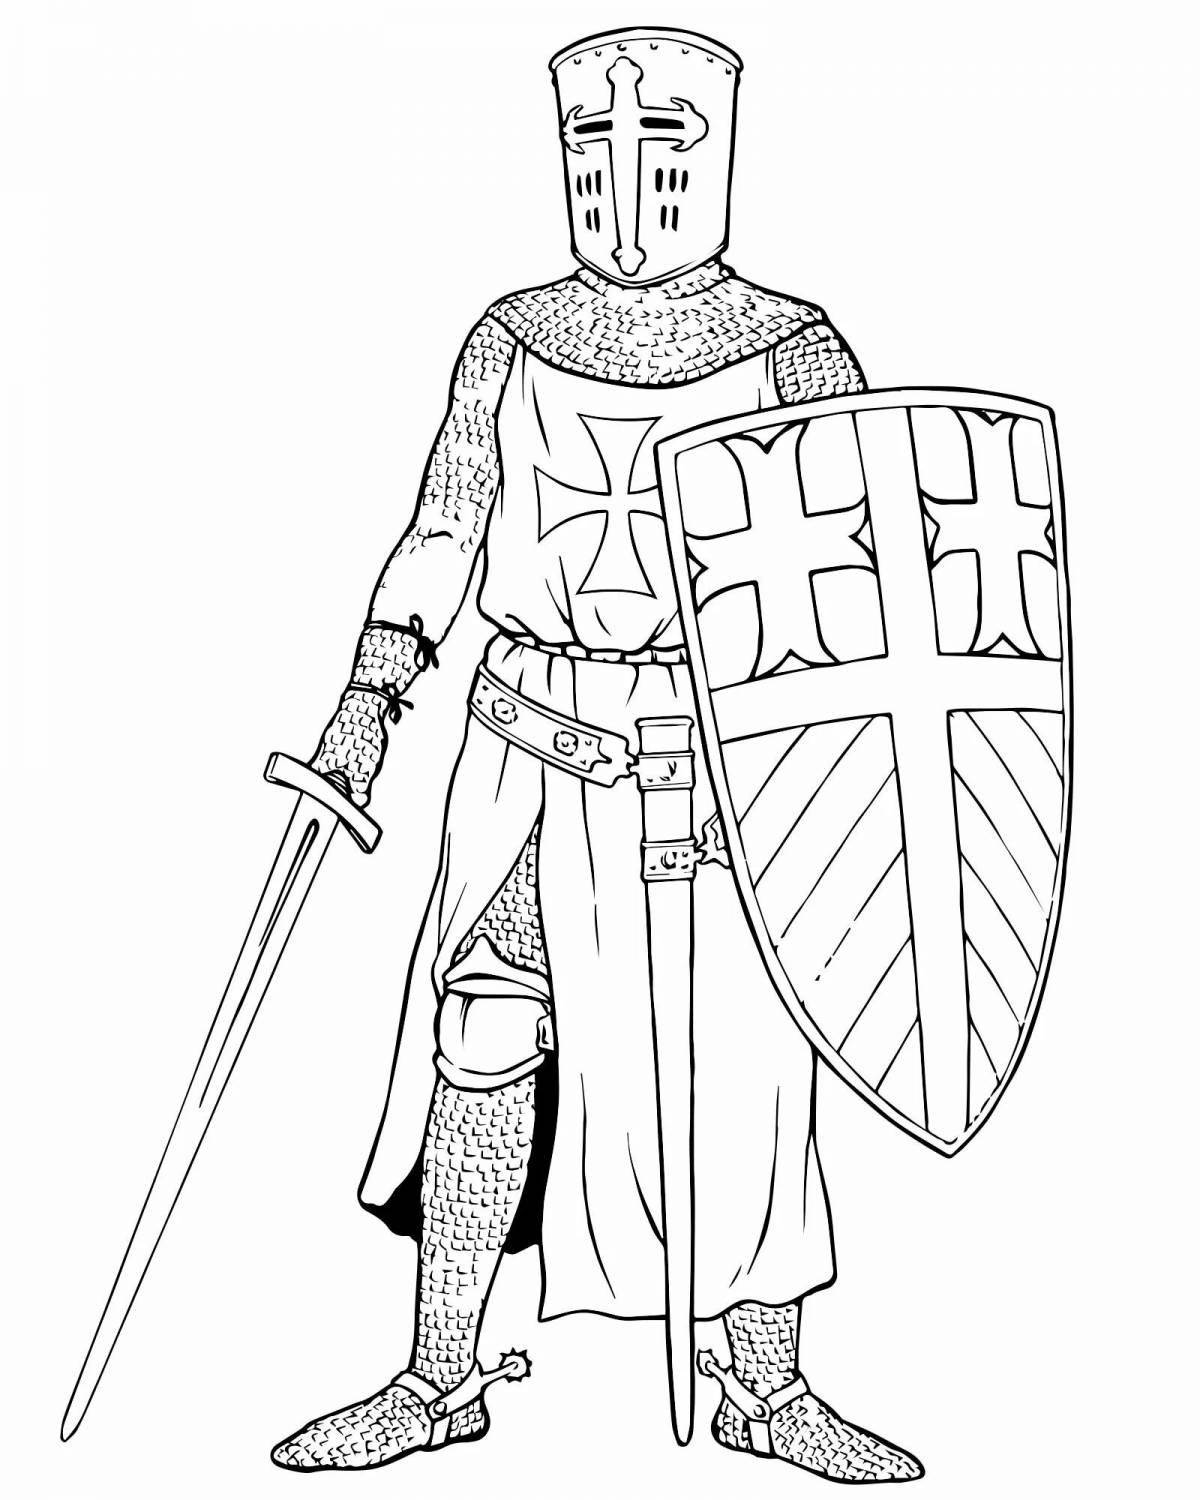 Majestic warrior coloring page